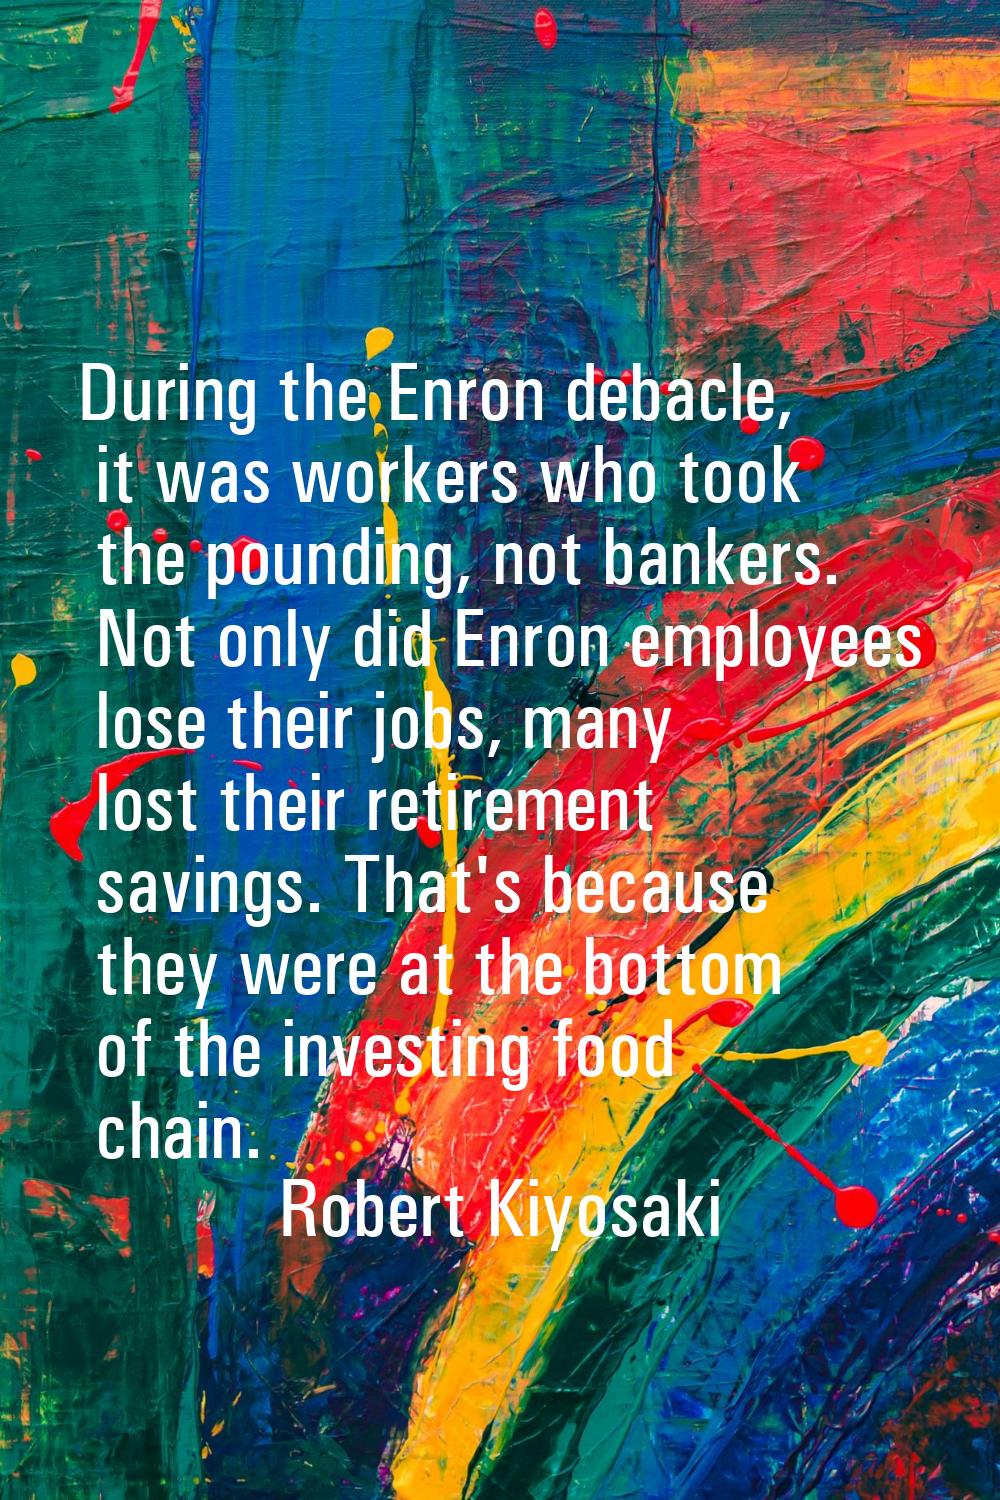 During the Enron debacle, it was workers who took the pounding, not bankers. Not only did Enron emp